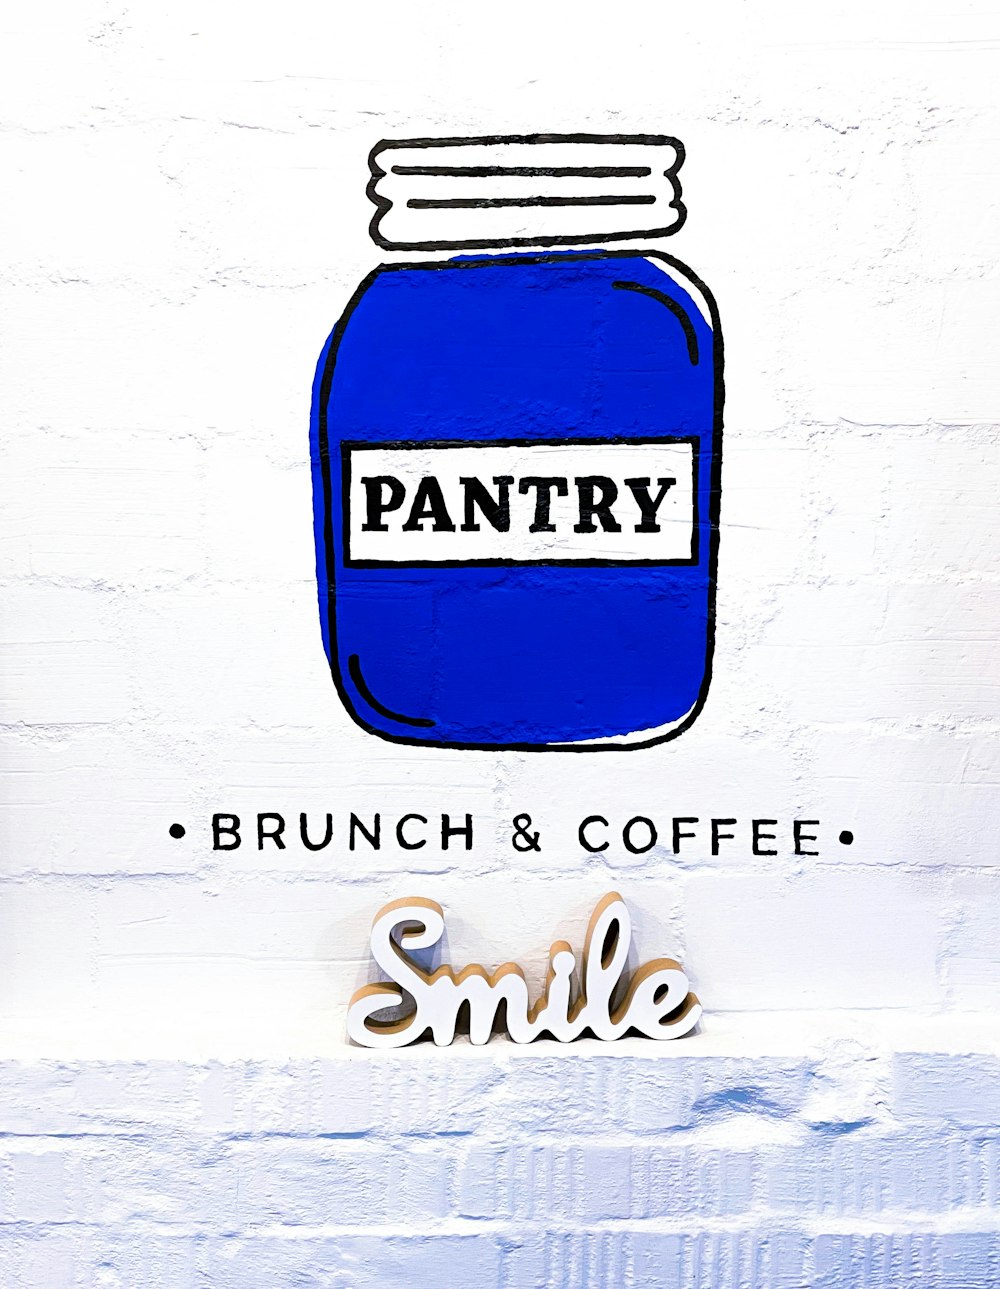 text photo – Free Pantry brunch & coffee Image on Unsplash